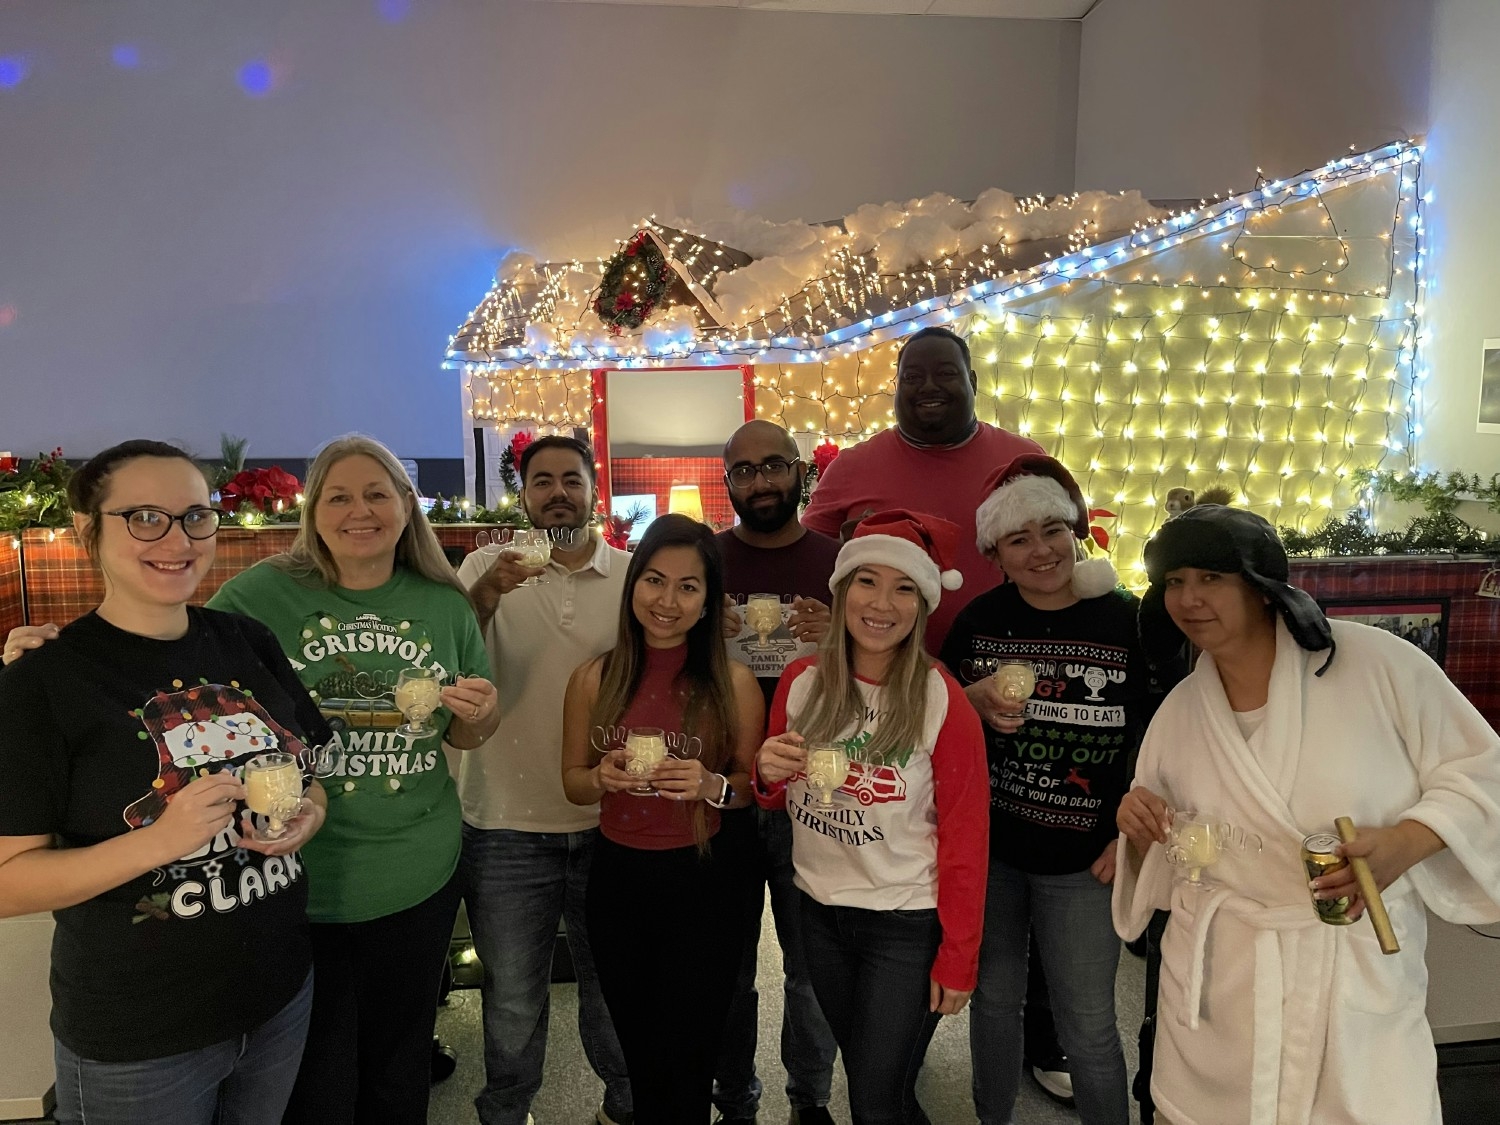 One of our fun holiday team building activities was decorating  department room areas like a Christmas movie. 